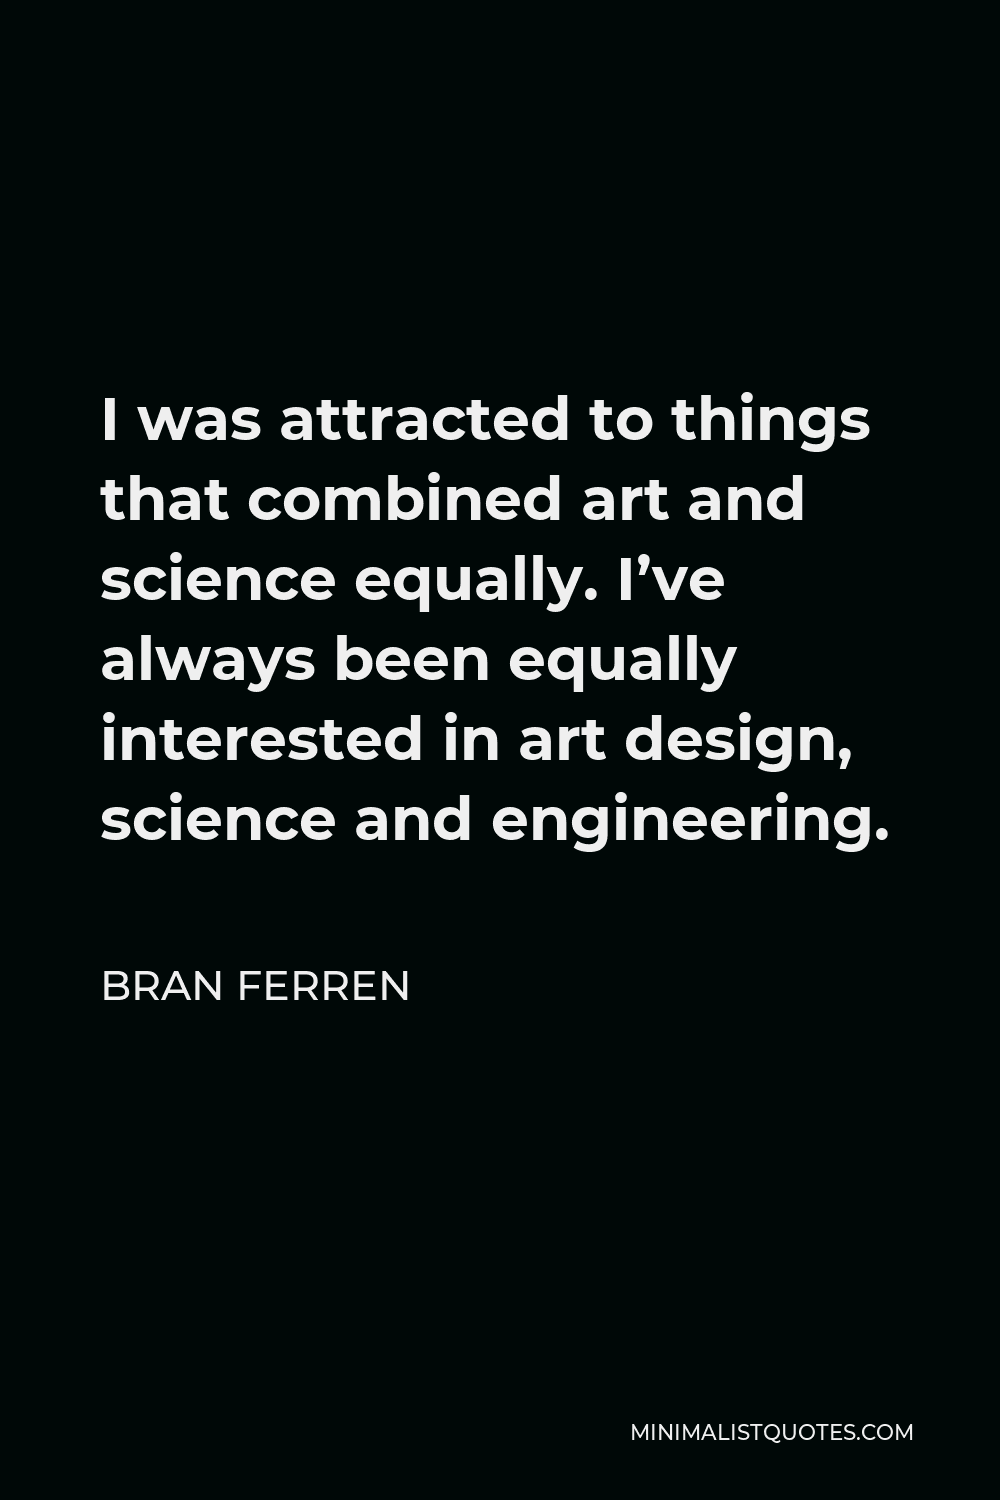 Bran Ferren Quote - I was attracted to things that combined art and science equally. I’ve always been equally interested in art design, science and engineering.